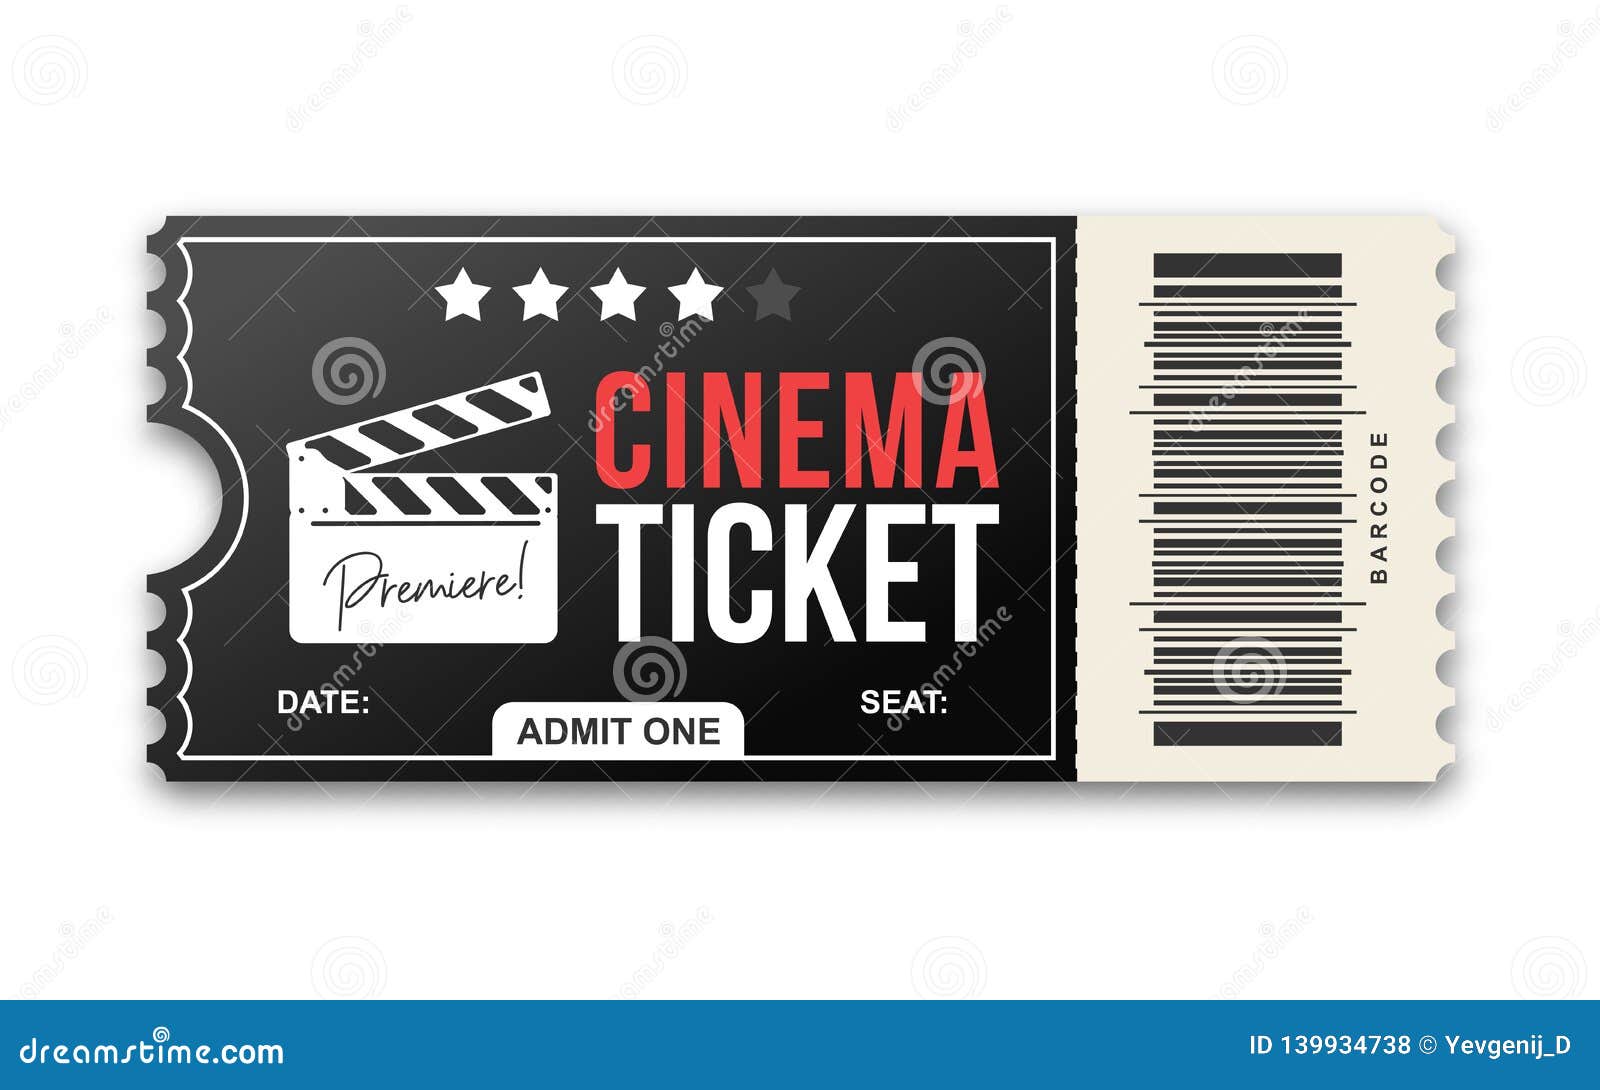 Cinema Ticket On White Background Movie Ticket Template Black And Red Colors Stock Vector Illustration Of Mockup Movie 139934738